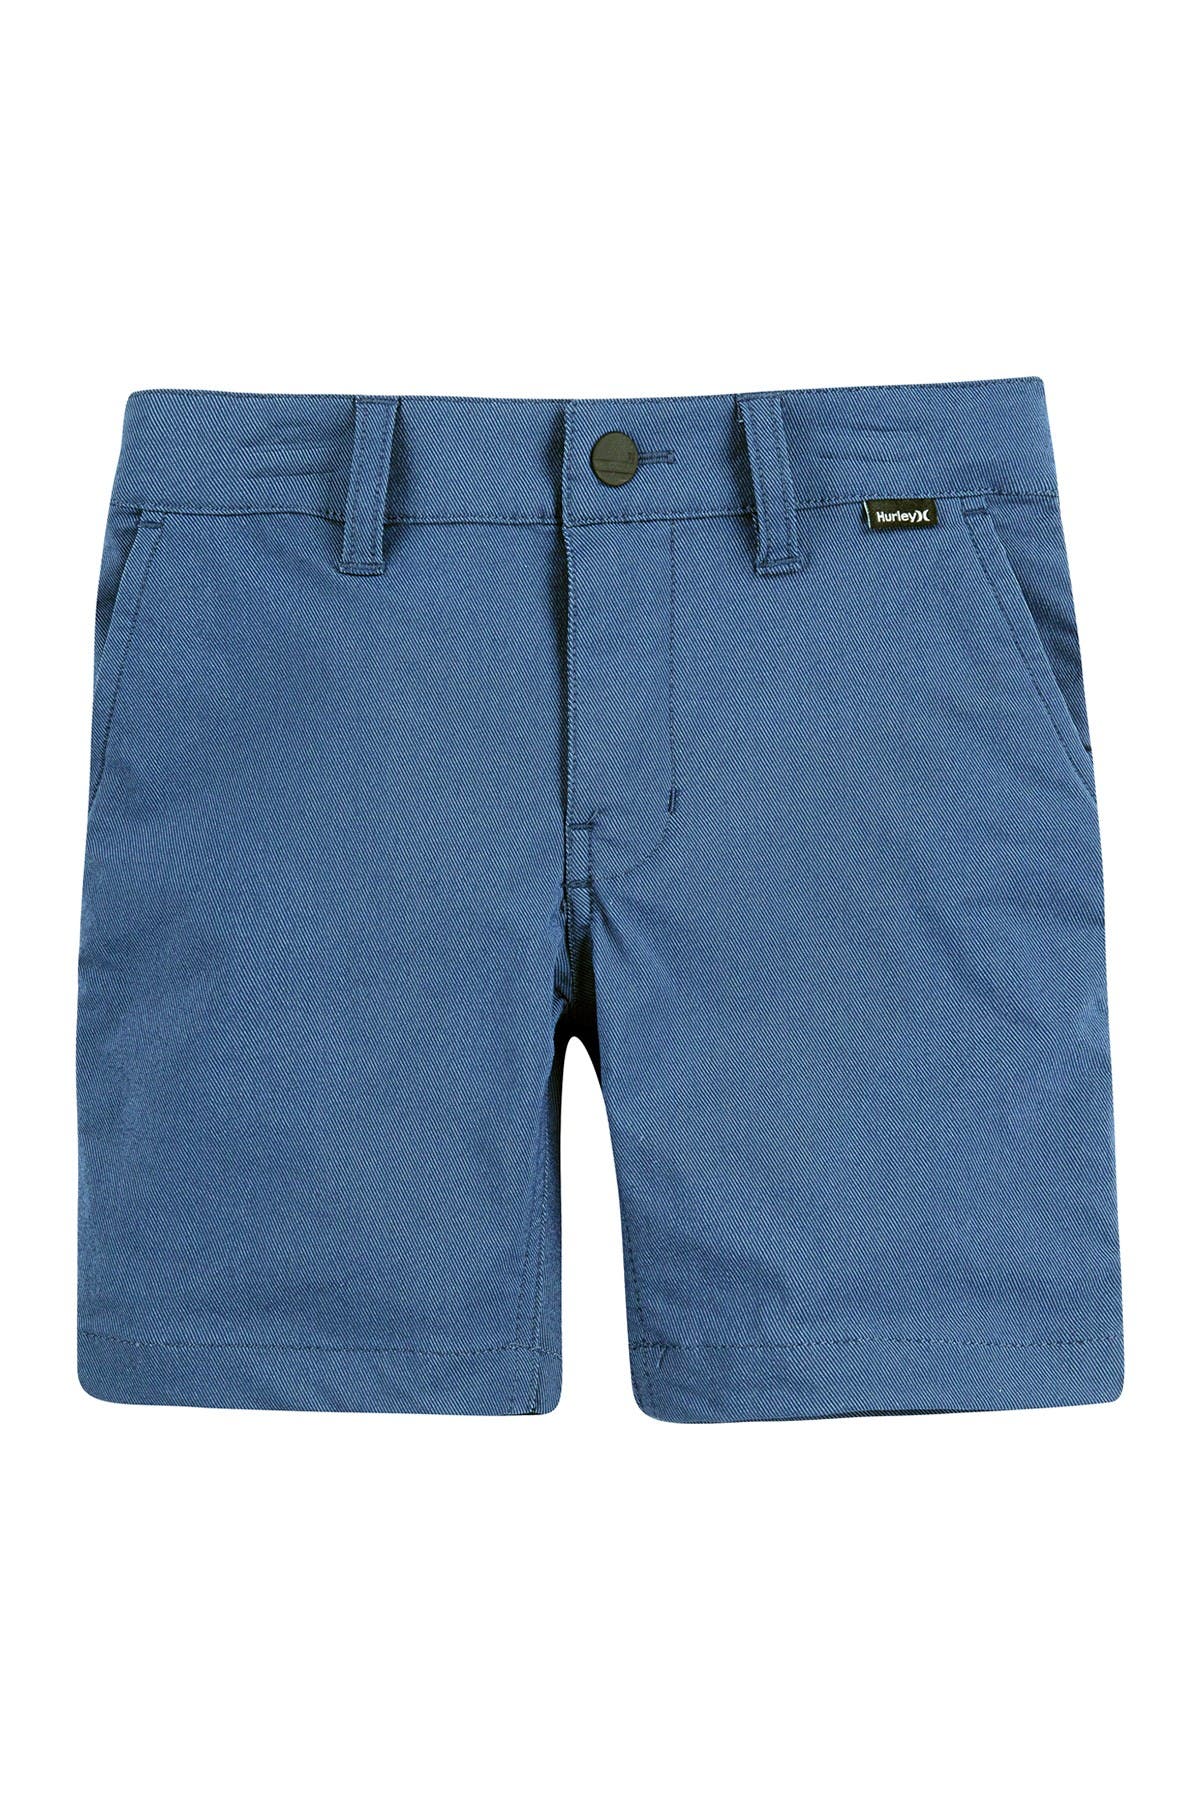 Hurley Kids' Dri-fit Chino Shorts In Periwinkle